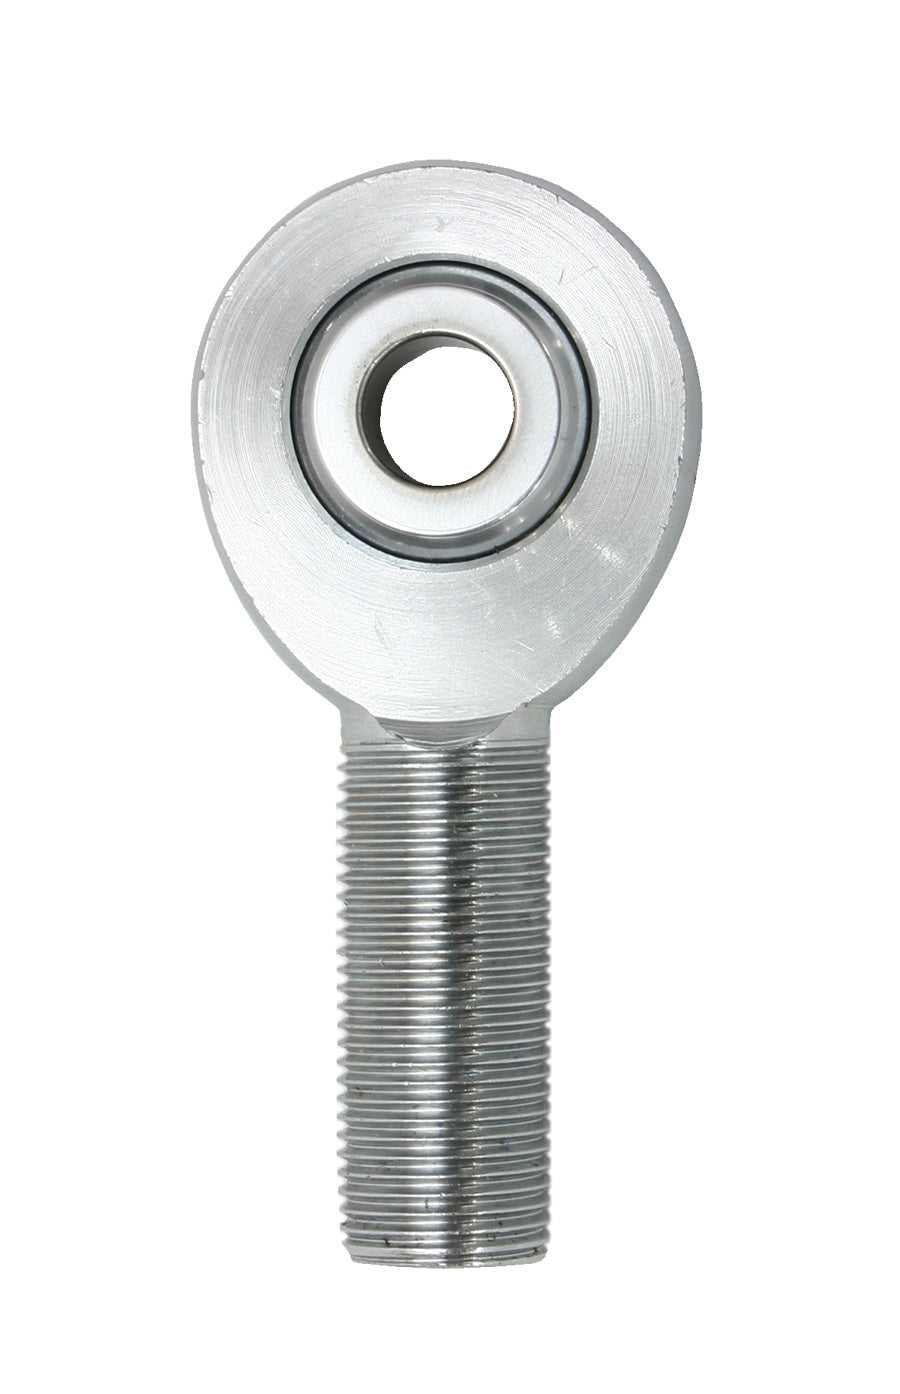 C6019 Competition Engineering Rod End Spherical Rod Eye